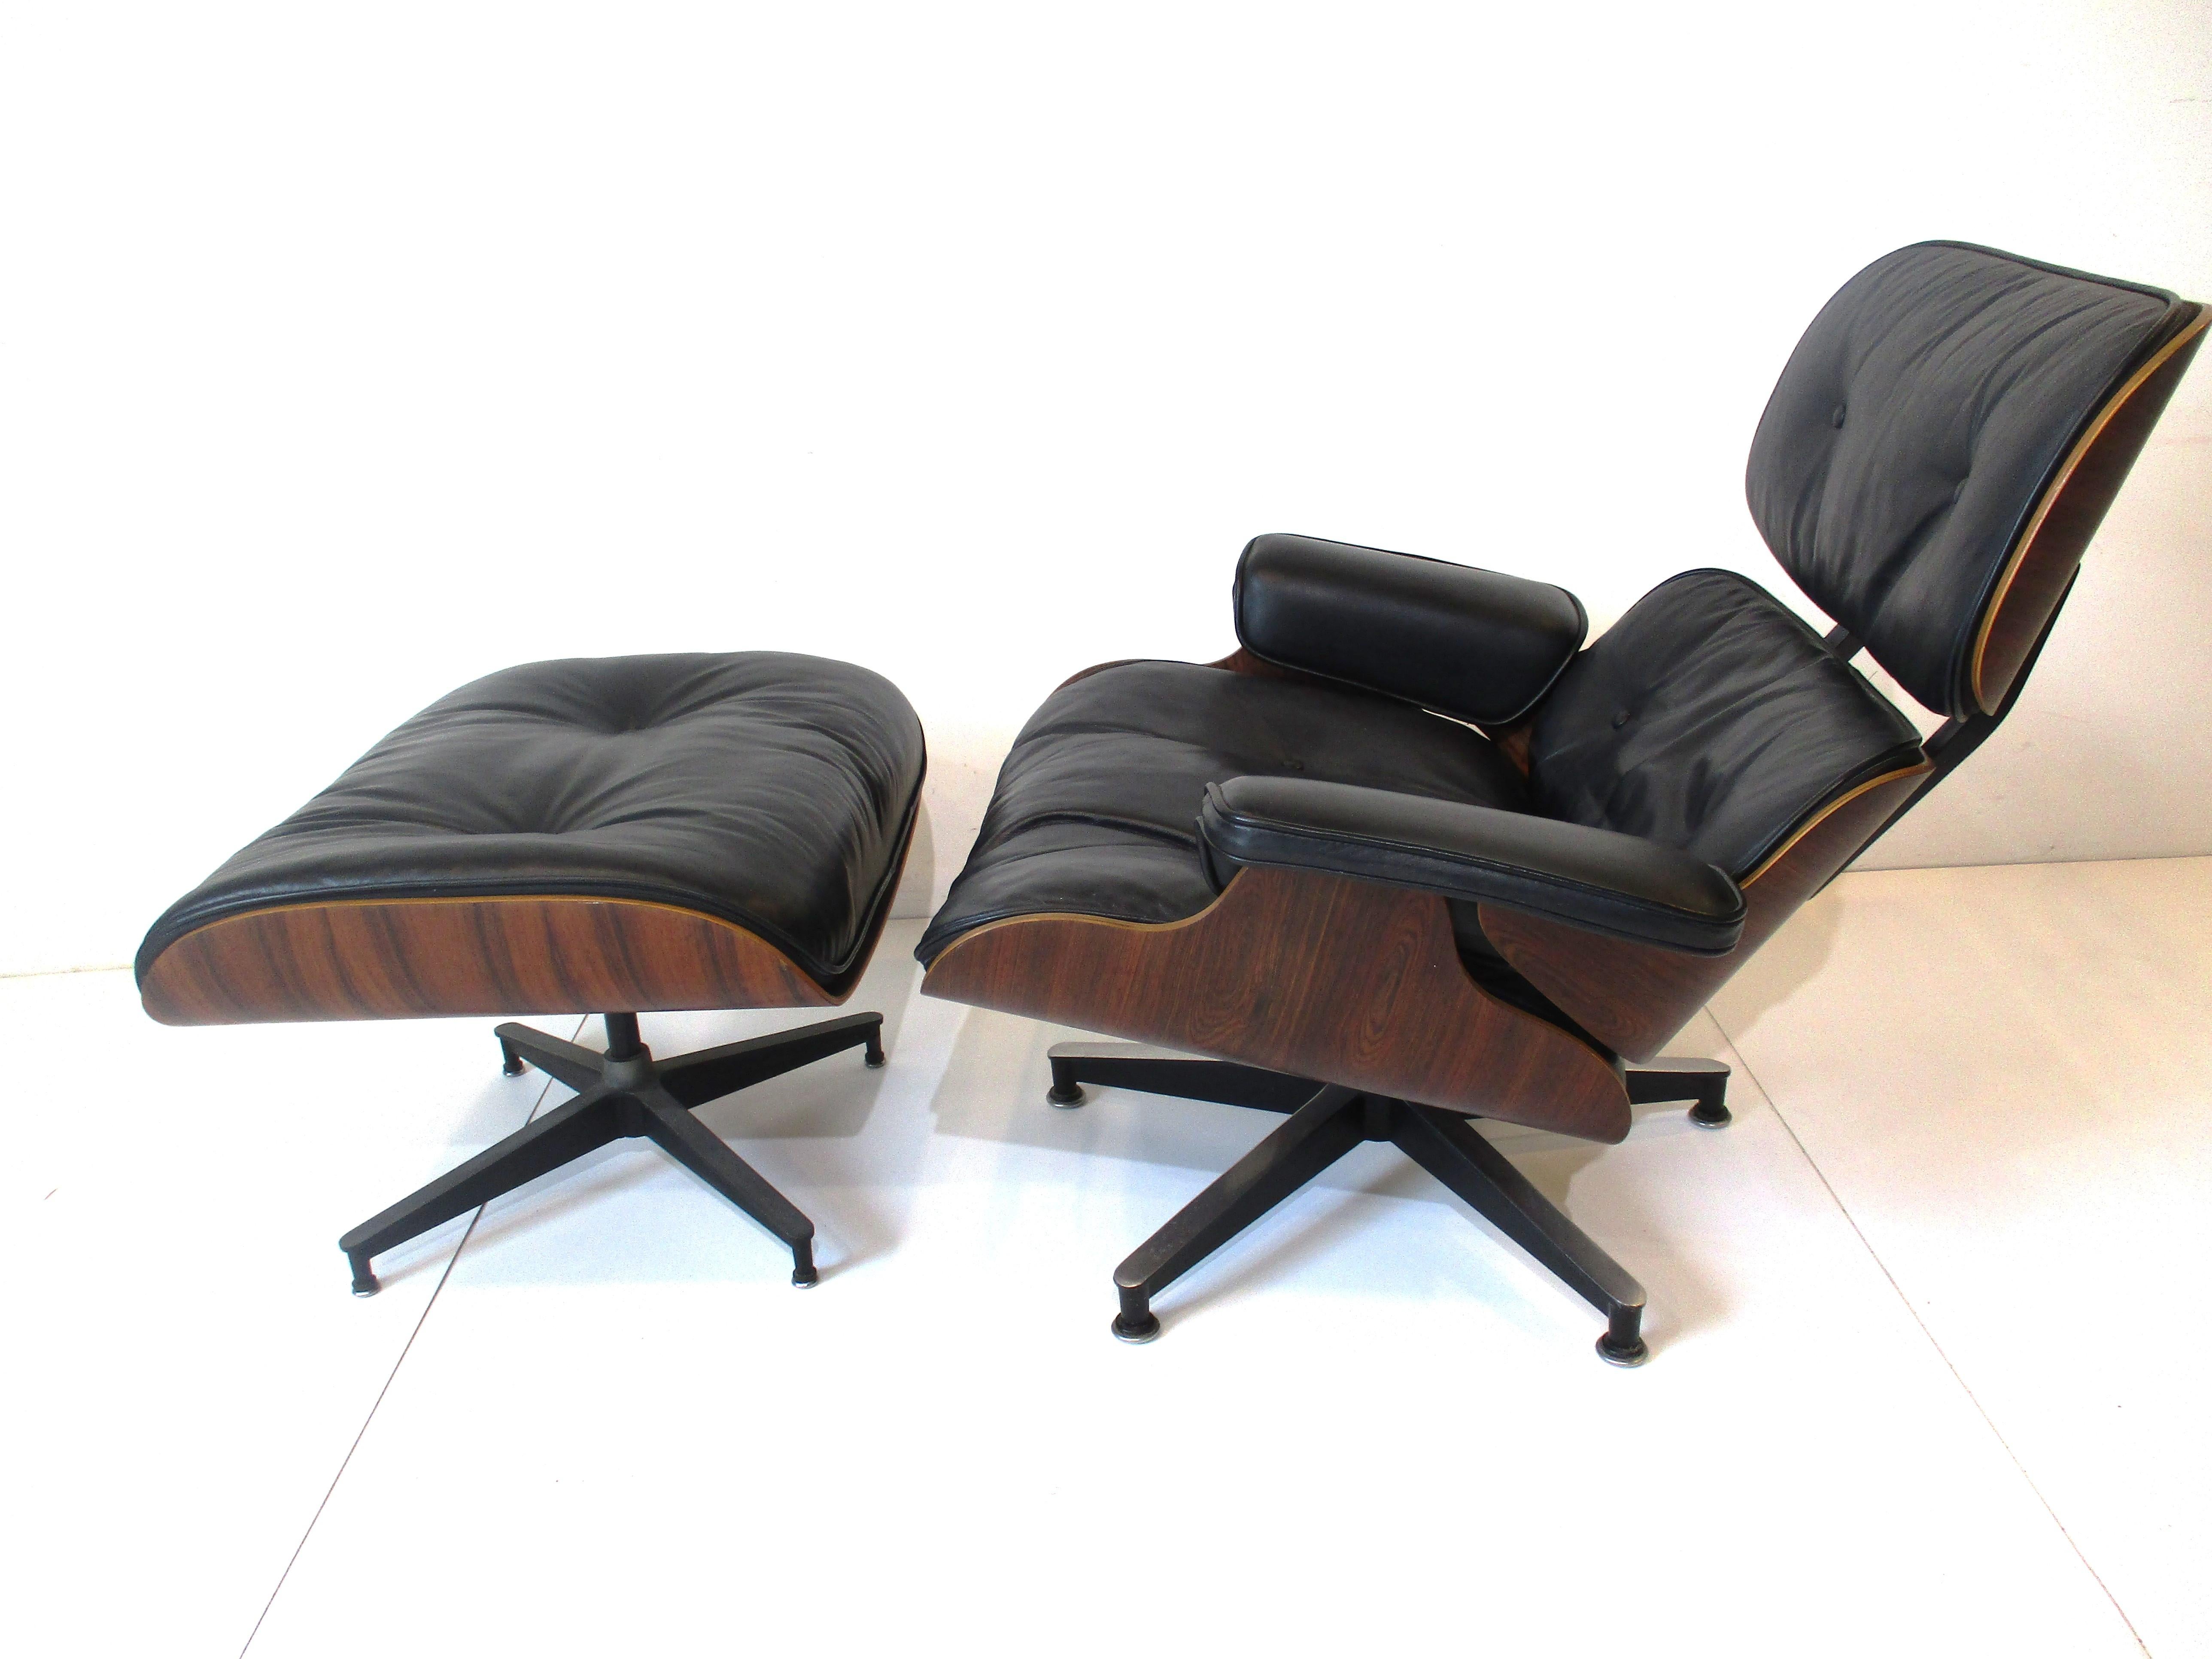 One of the most iconic designs from the Mid Century period the Eames 670 lounge chair with 671 ottoman .In the very desireable soft black leather matched with Brazilian rosewood frame sitting on cast aluminum star bases . Manufactured by the Herman